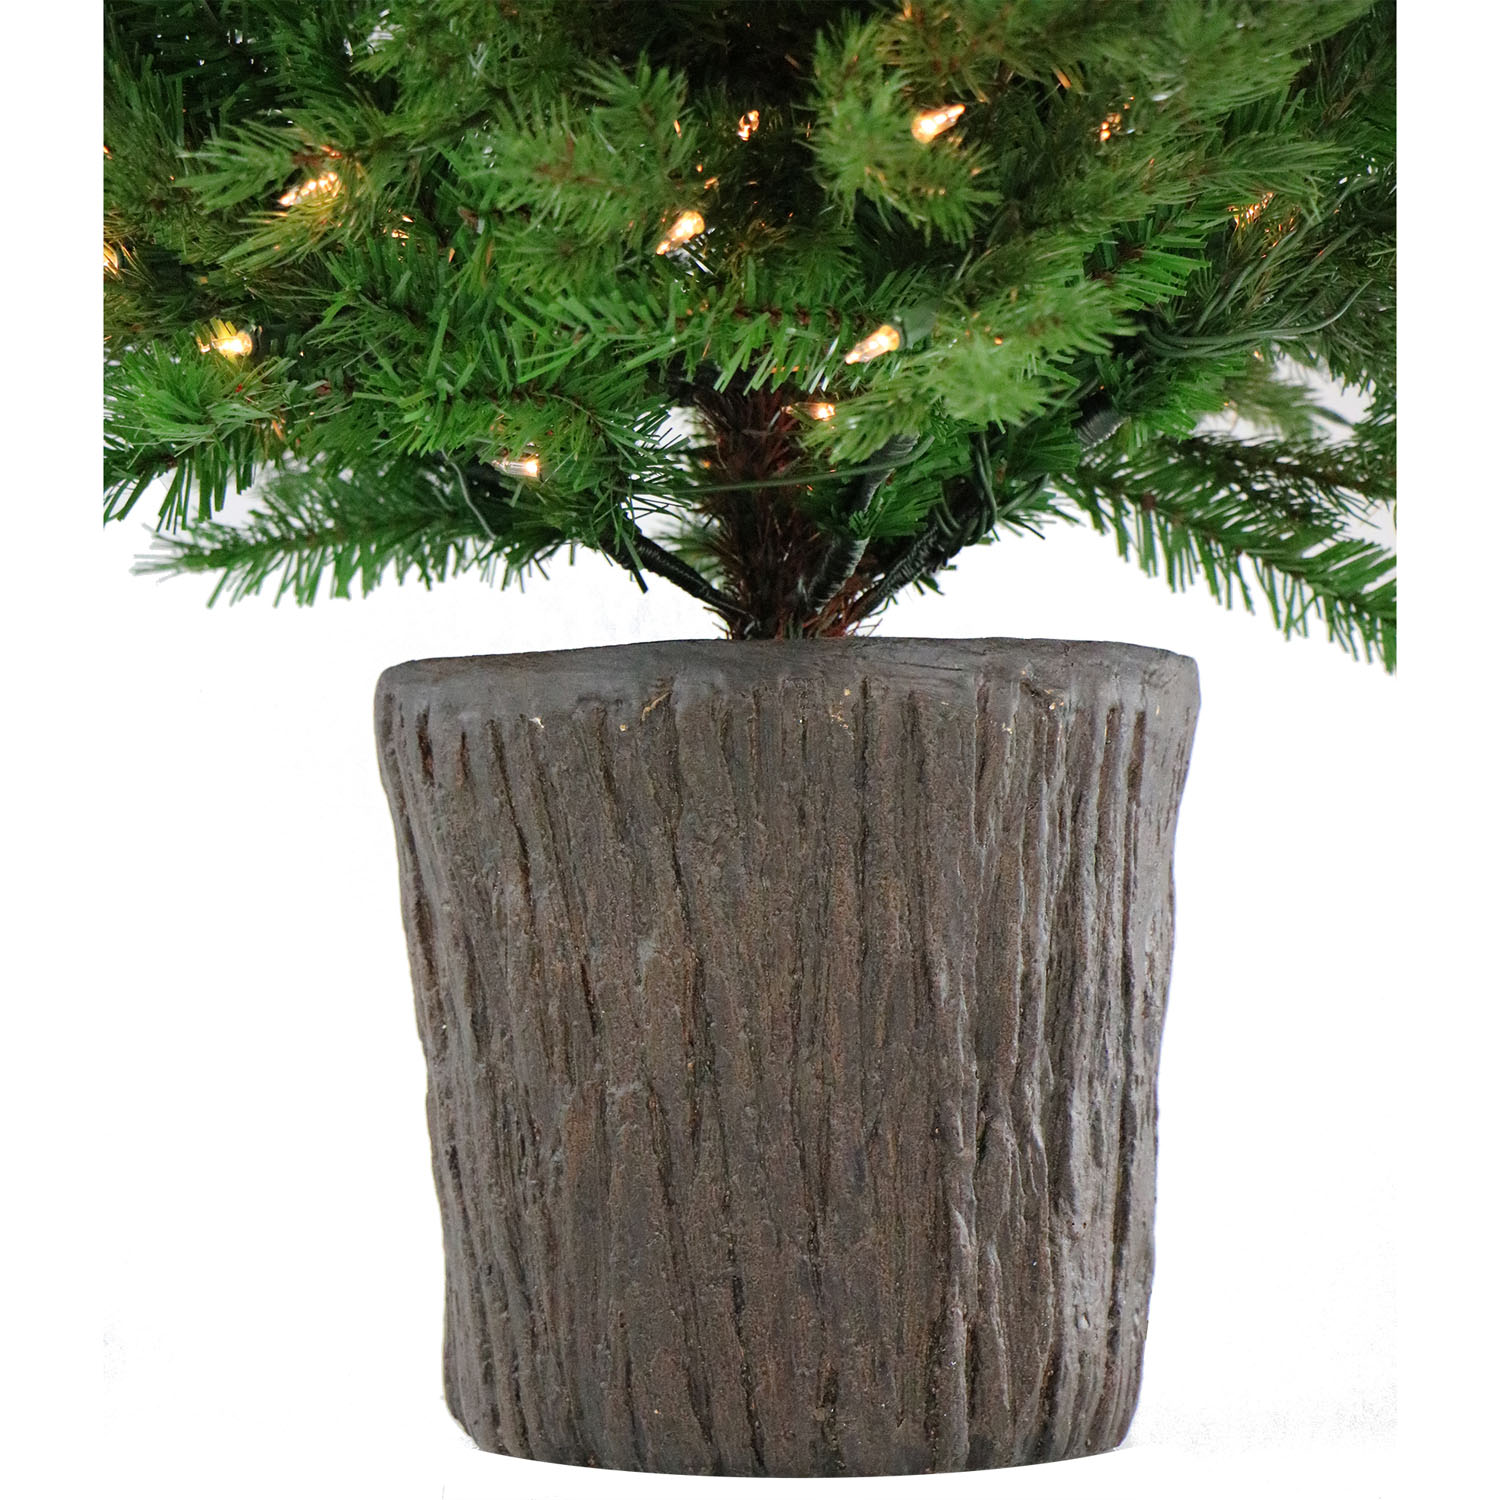 Fraser Hill Farm Set of Two New England Pine 4-Ft. Artificial Holiday Potted Trees with Smart LED Lighting - image 5 of 11